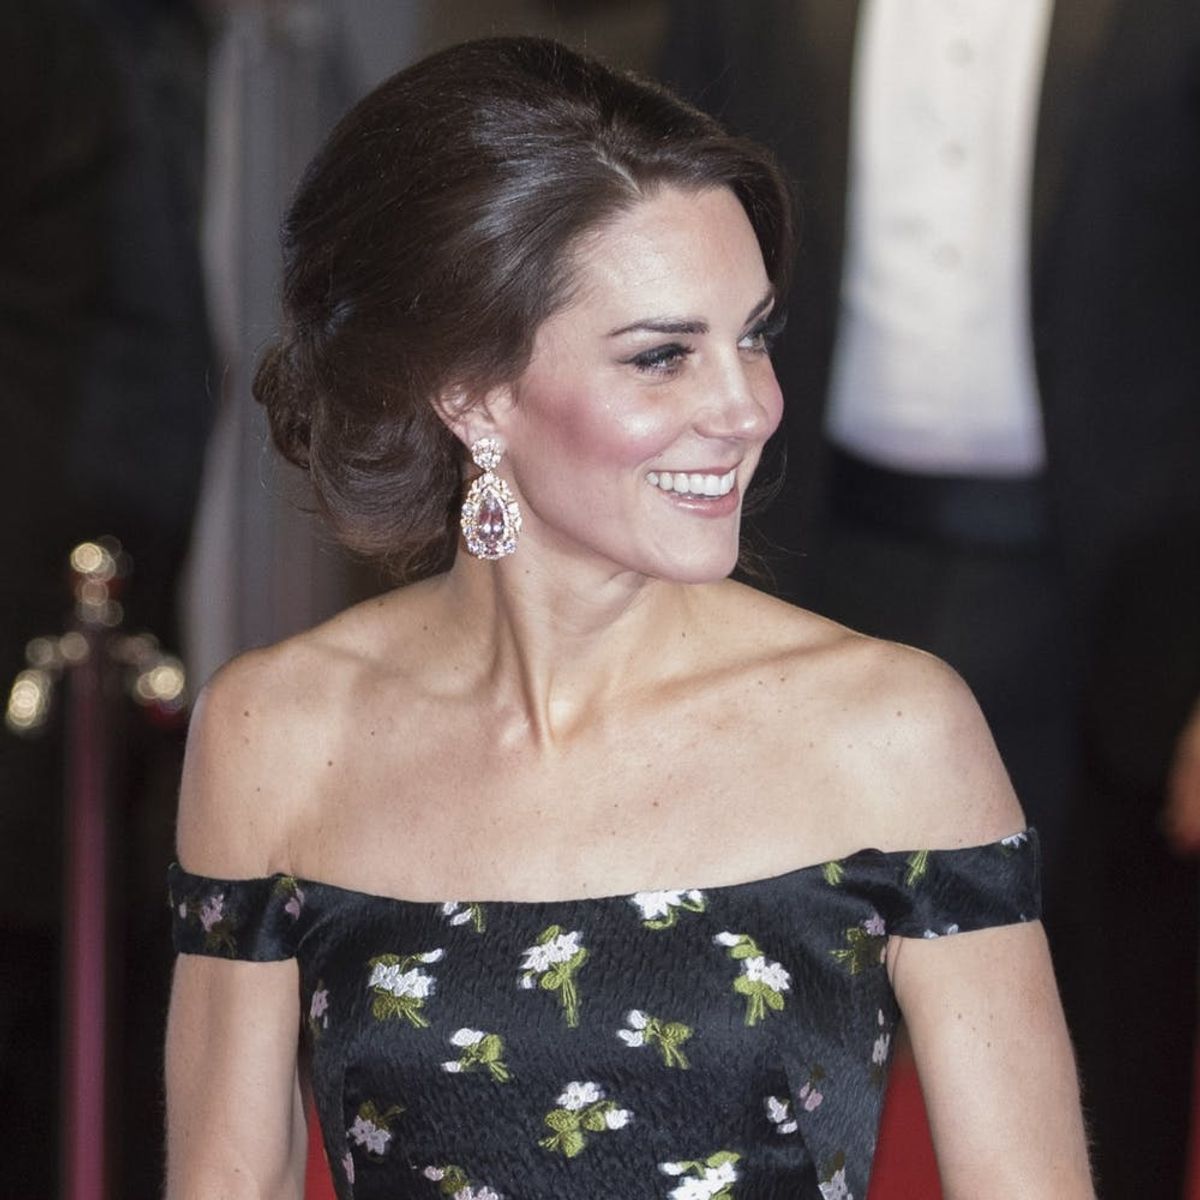 Kate Middleton Totally Pulled Off One of the Season’s Hottest Fashion Trends